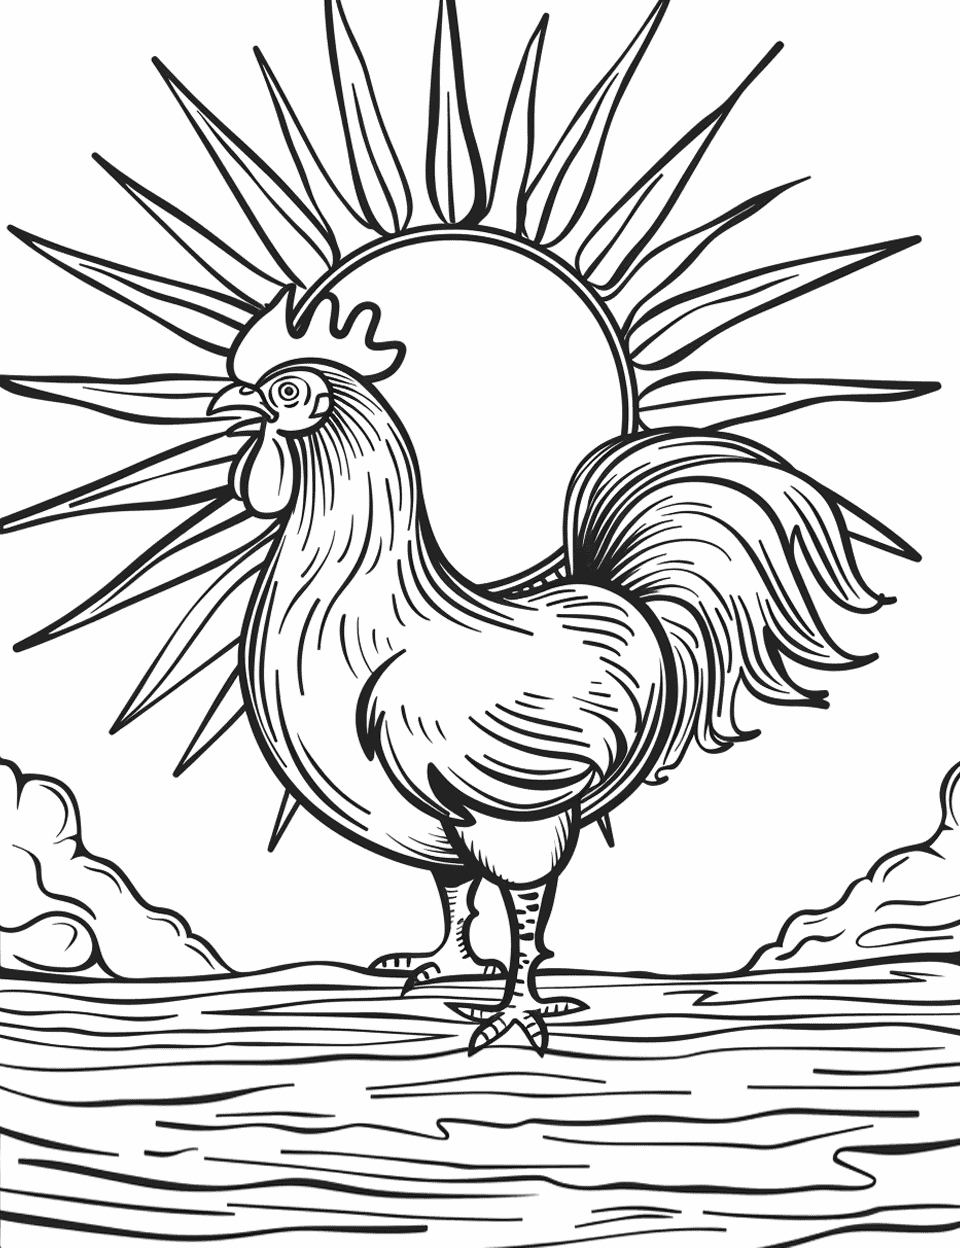 Morning Sun and Rooster Coloring Page - A rooster crowing as the morning sun rises behind it.